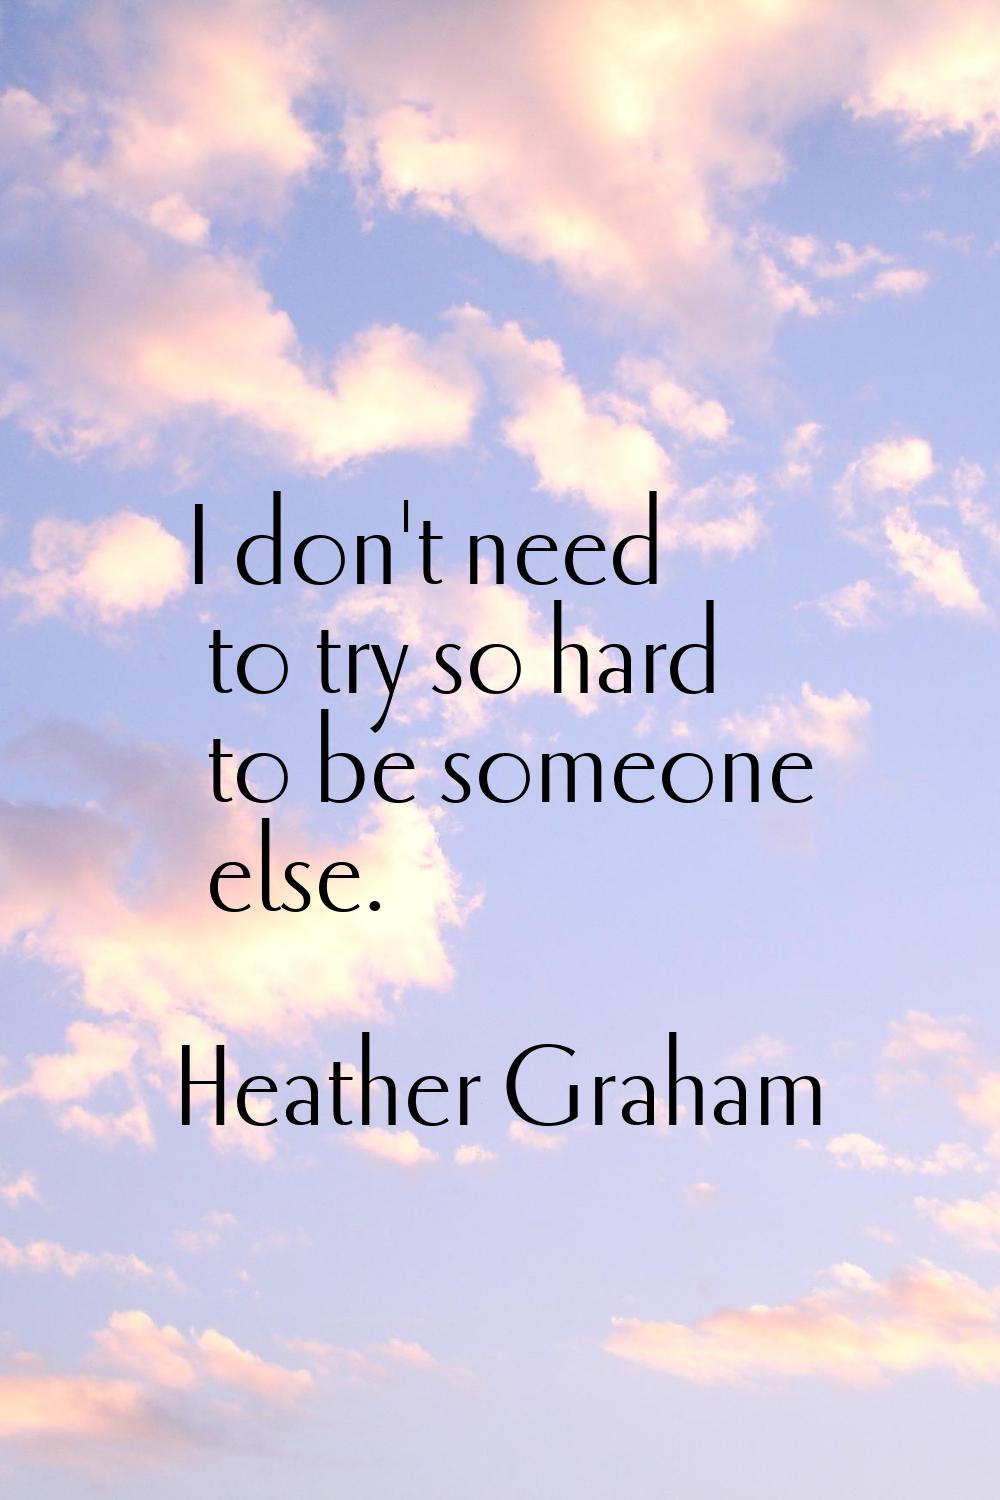 I don't need to try so hard to be someone else.